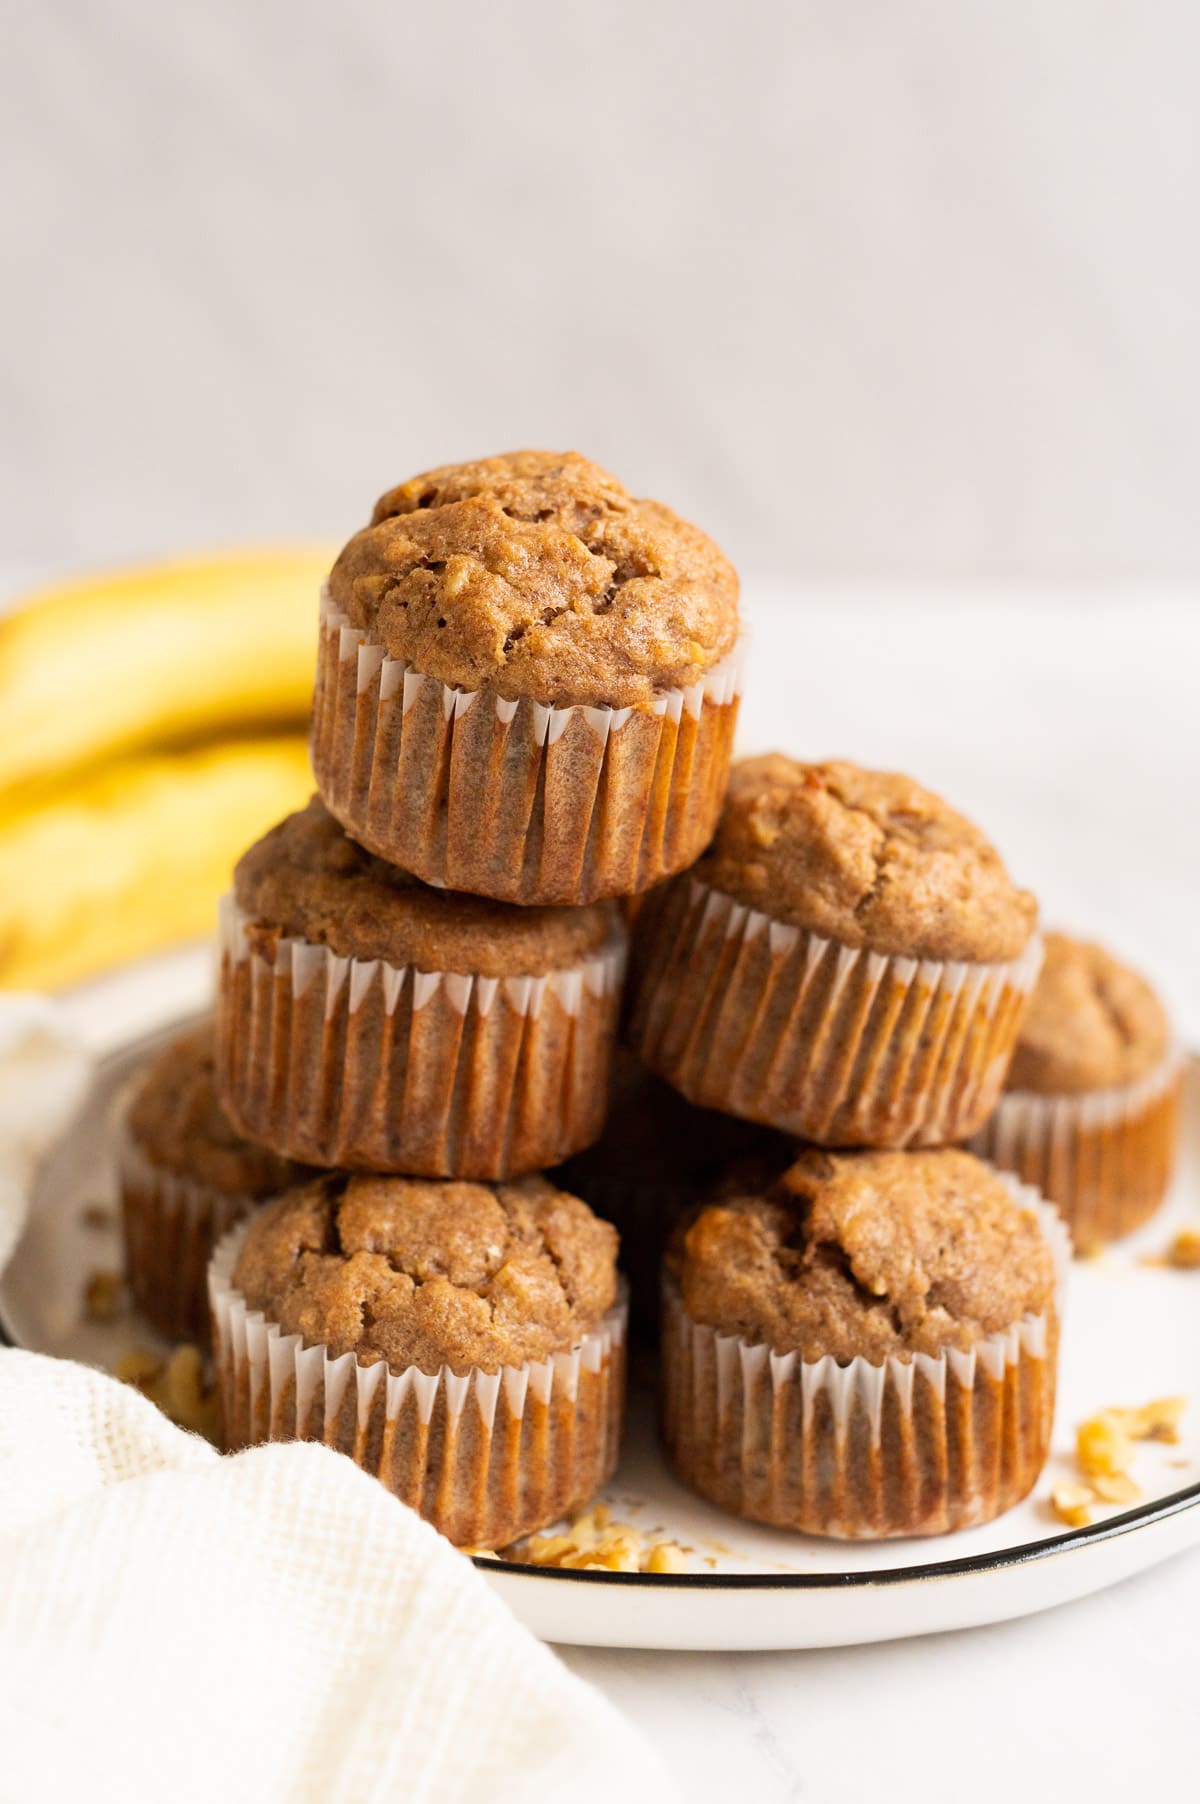 Five vegan banana muffins stacked on a plate and bananas behind.